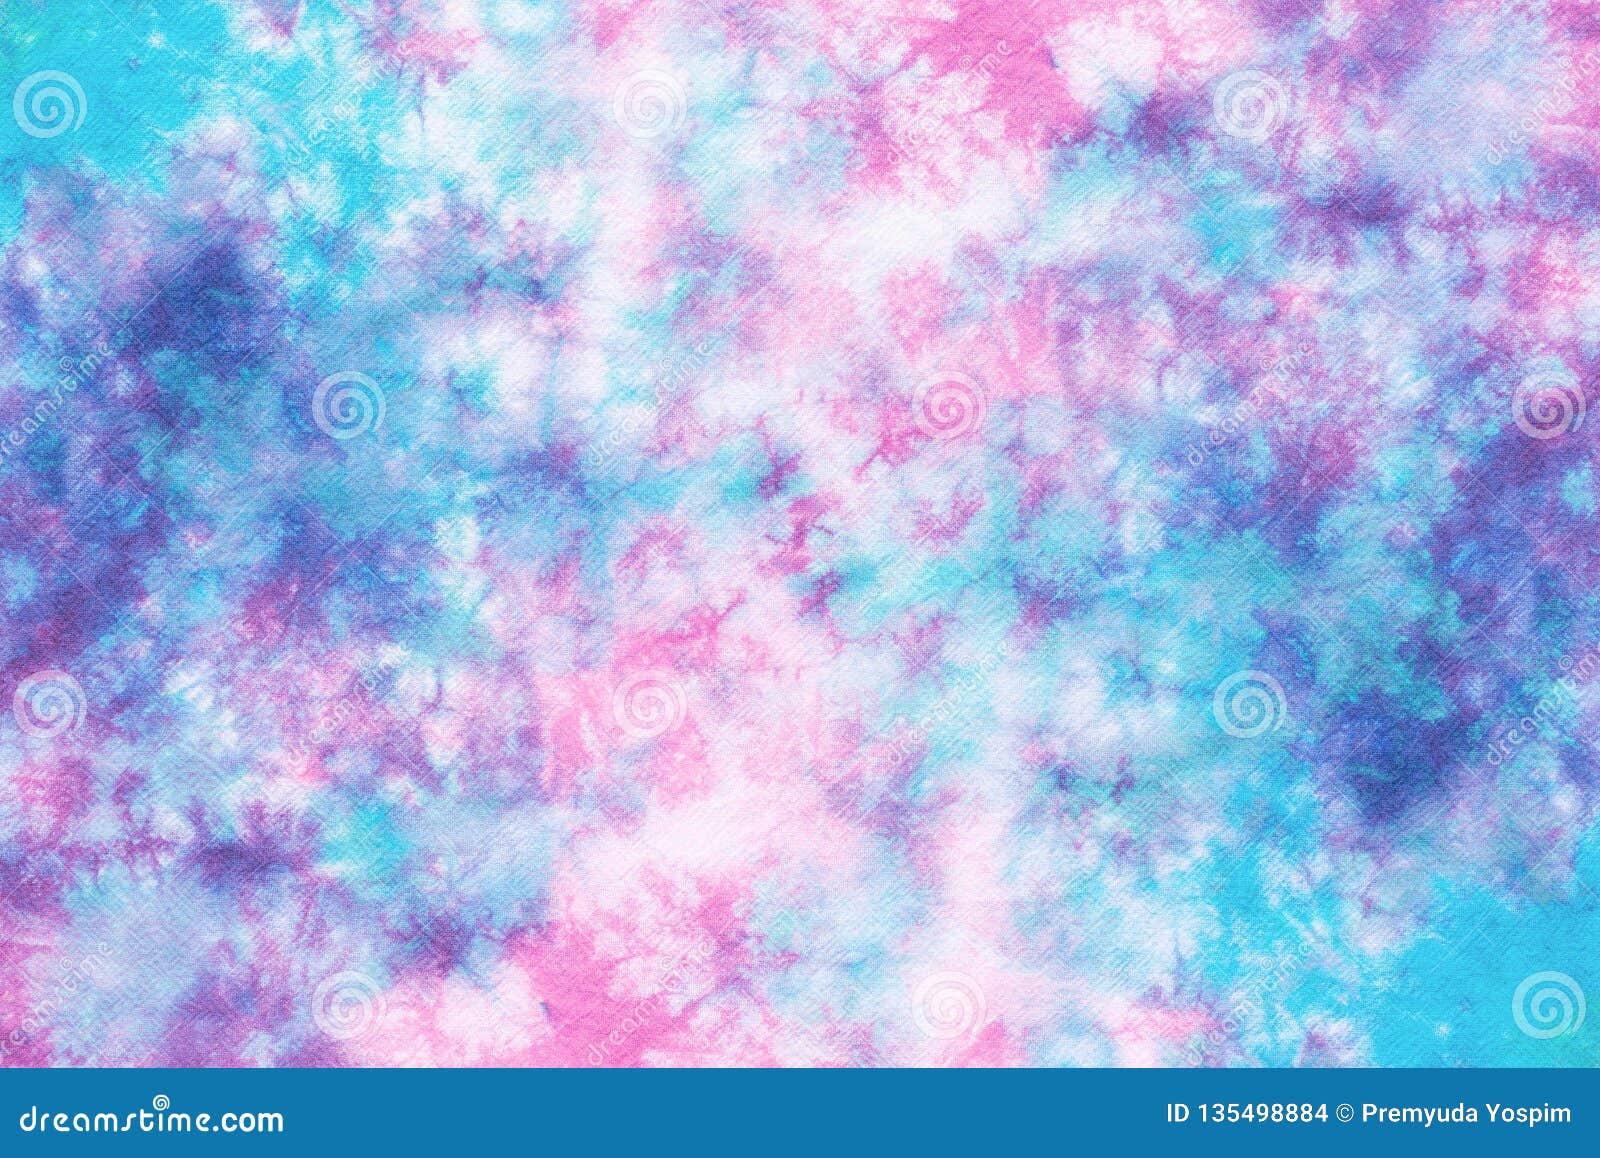 https://thumbs.dreamstime.com/z/colorful-tie-dye-pattern-abstract-background-135498884.jpg